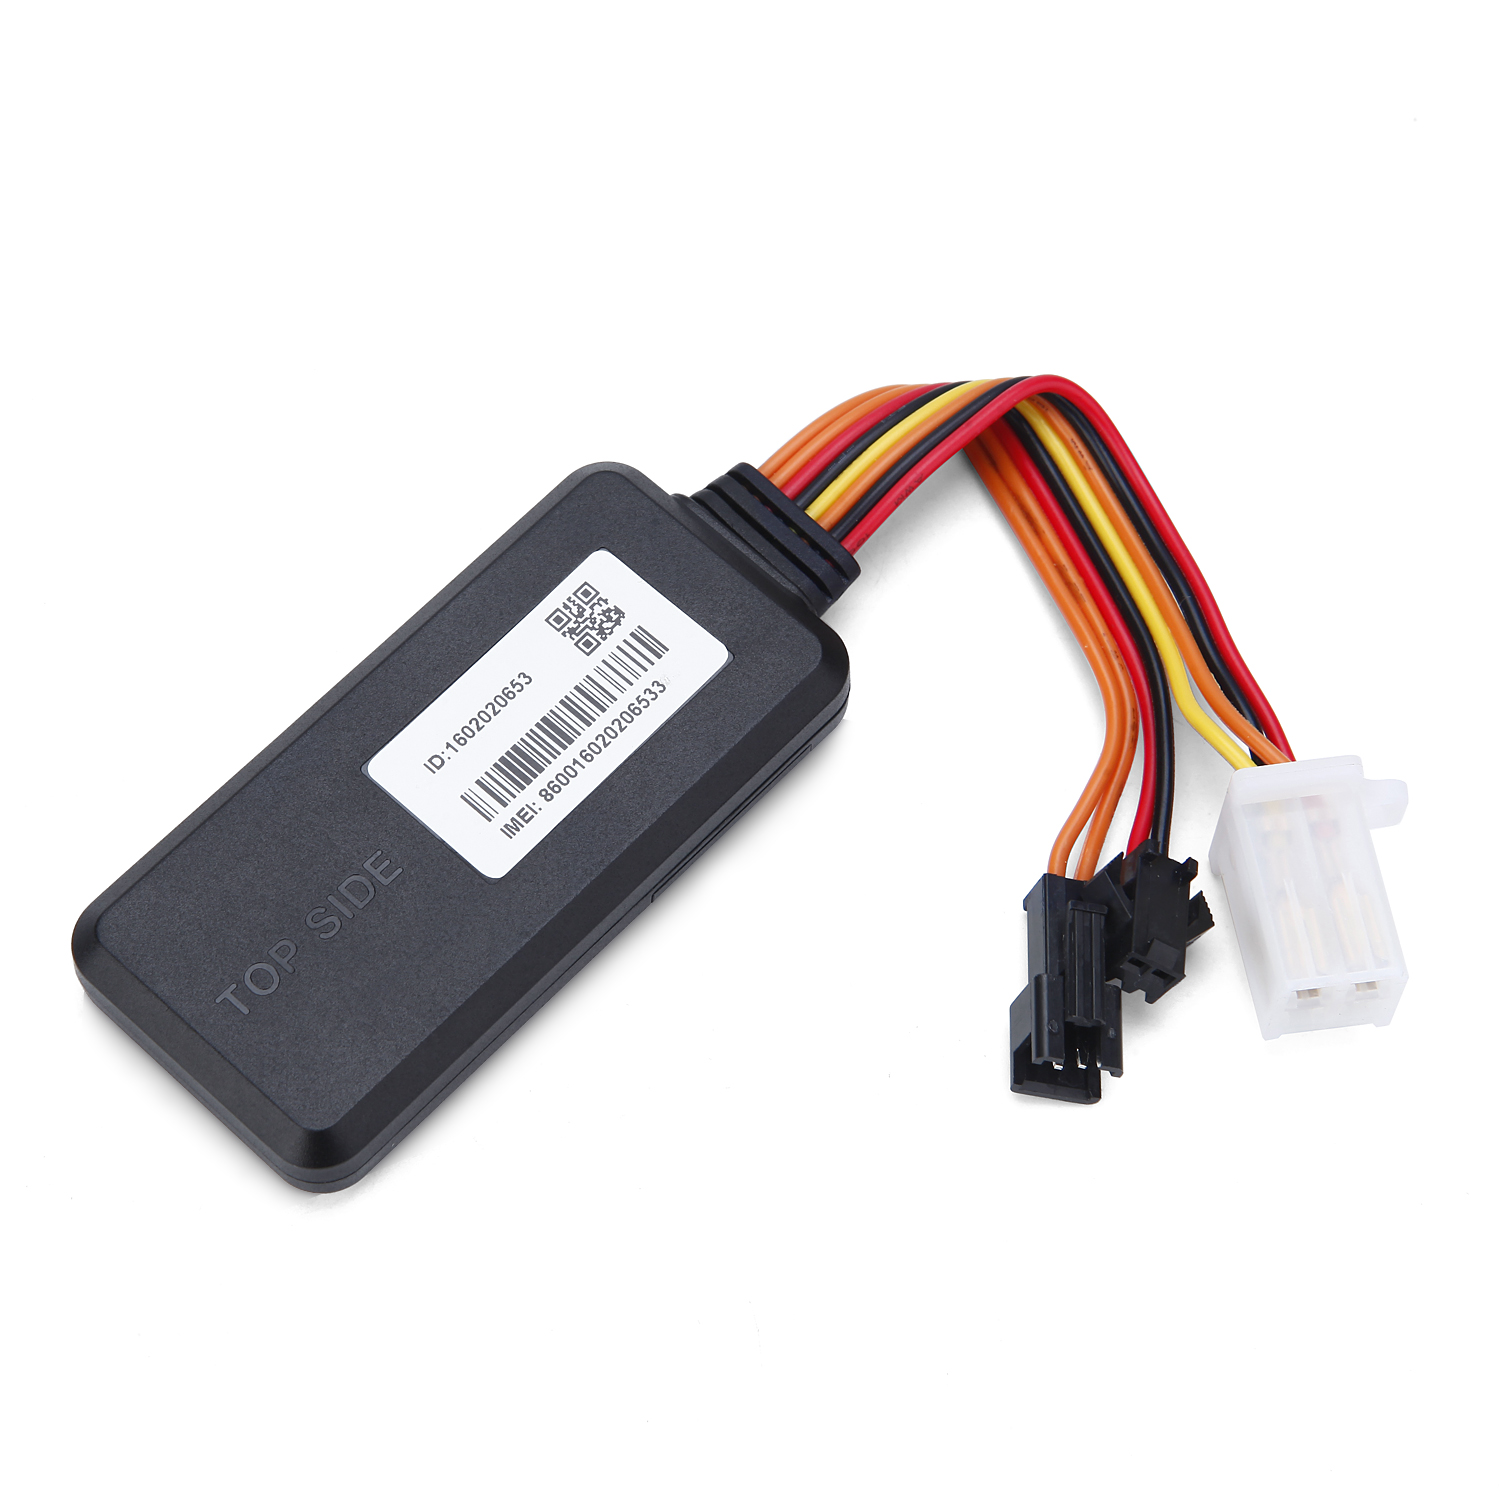 DT20 Best Cheap hidden gps tracker for car with smallest tiny size and best Quality Stability